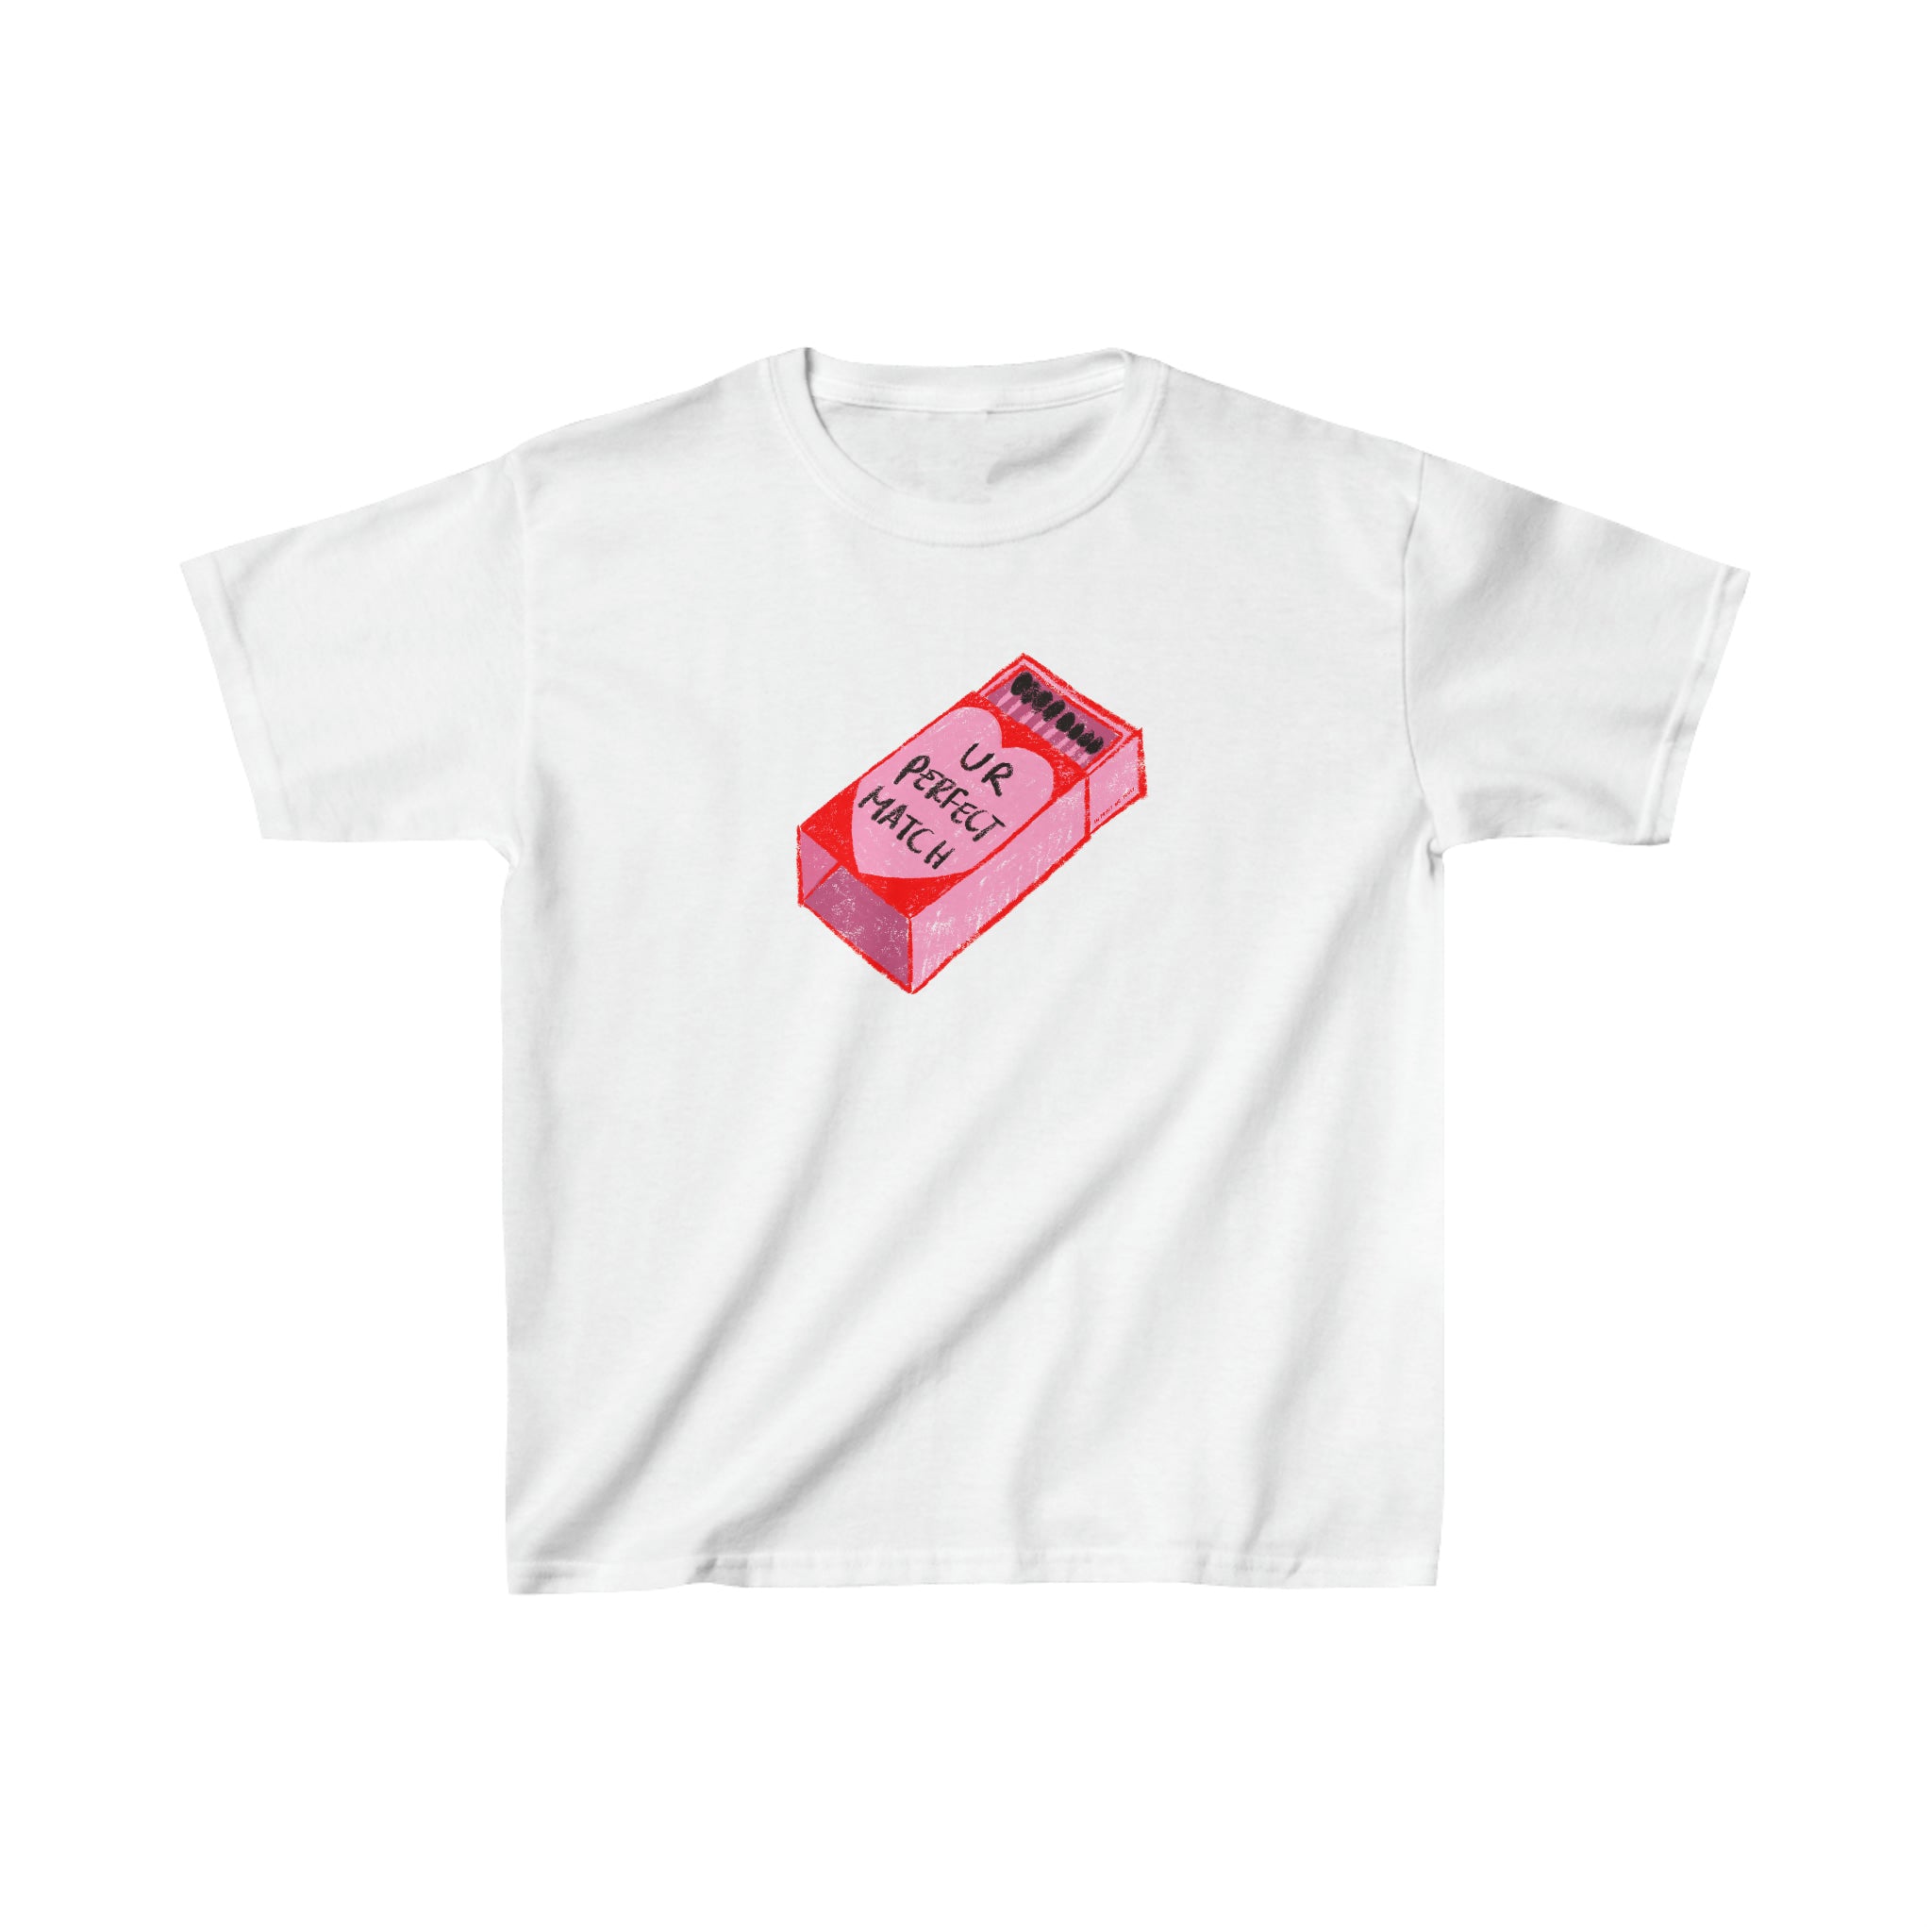 'Ur Perfect Match' baby tee - In Print We Trust